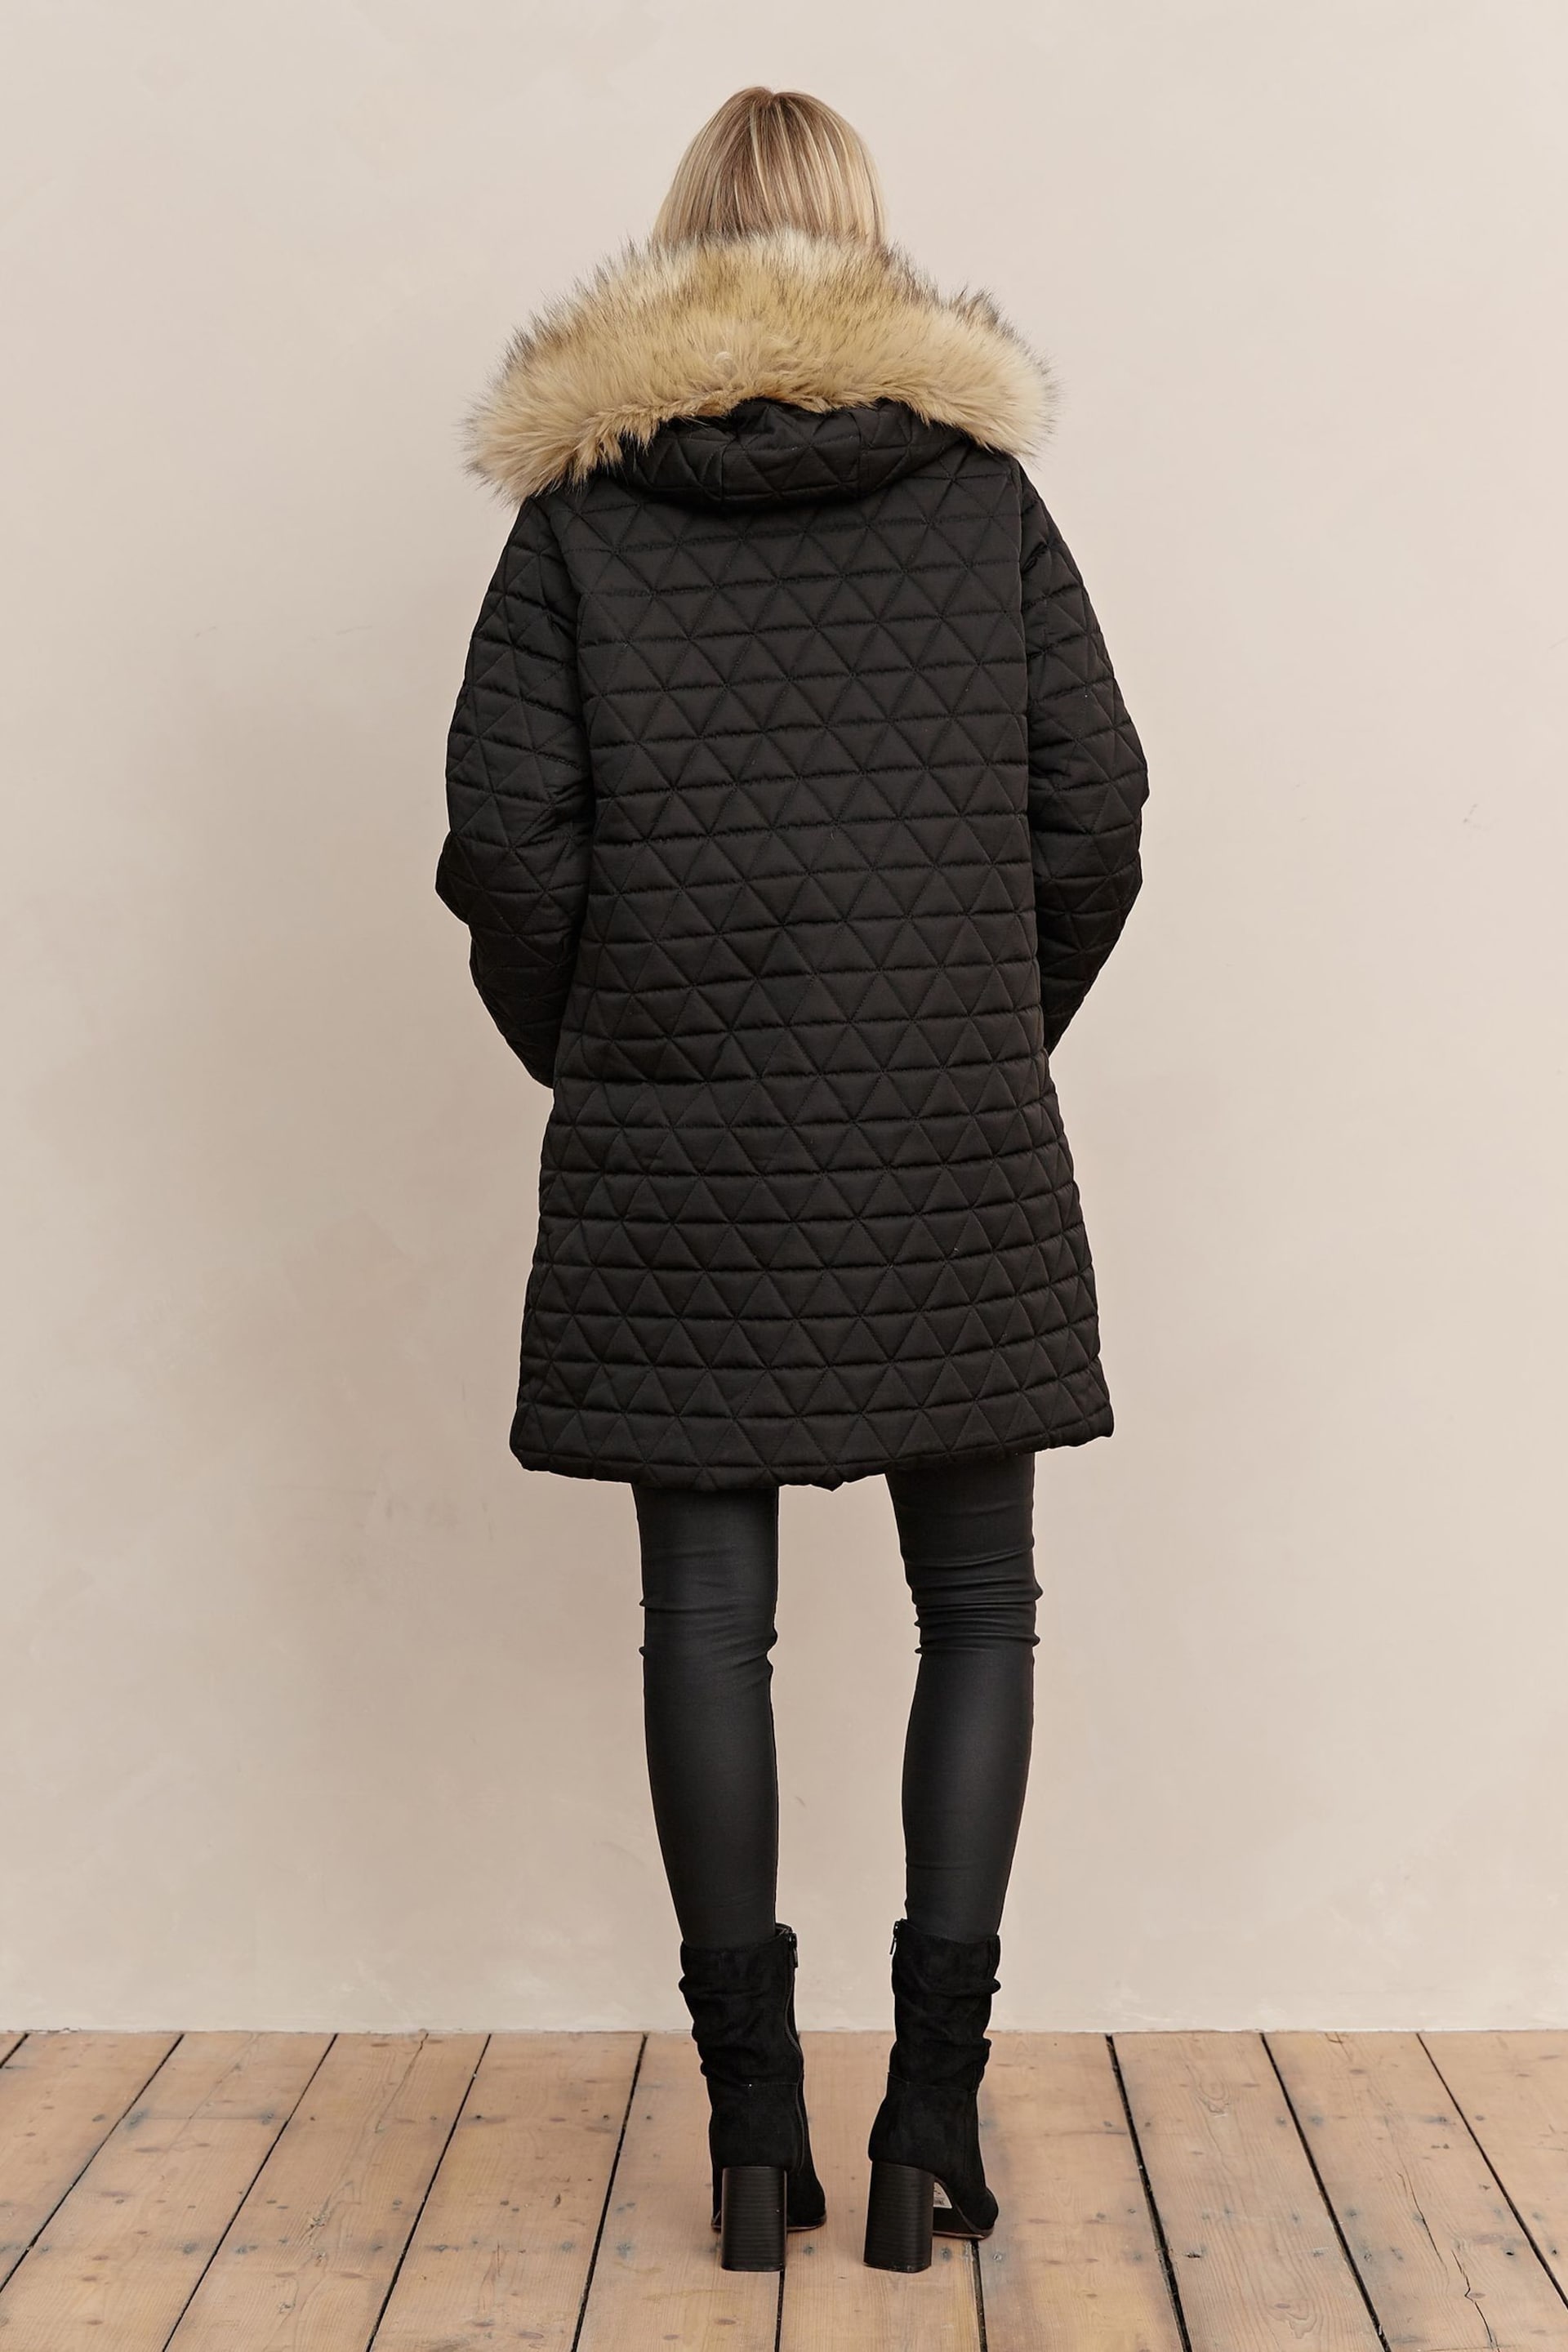 Society 8 Romy Black Quilted Faux Fur Puffer Coat - Image 3 of 6